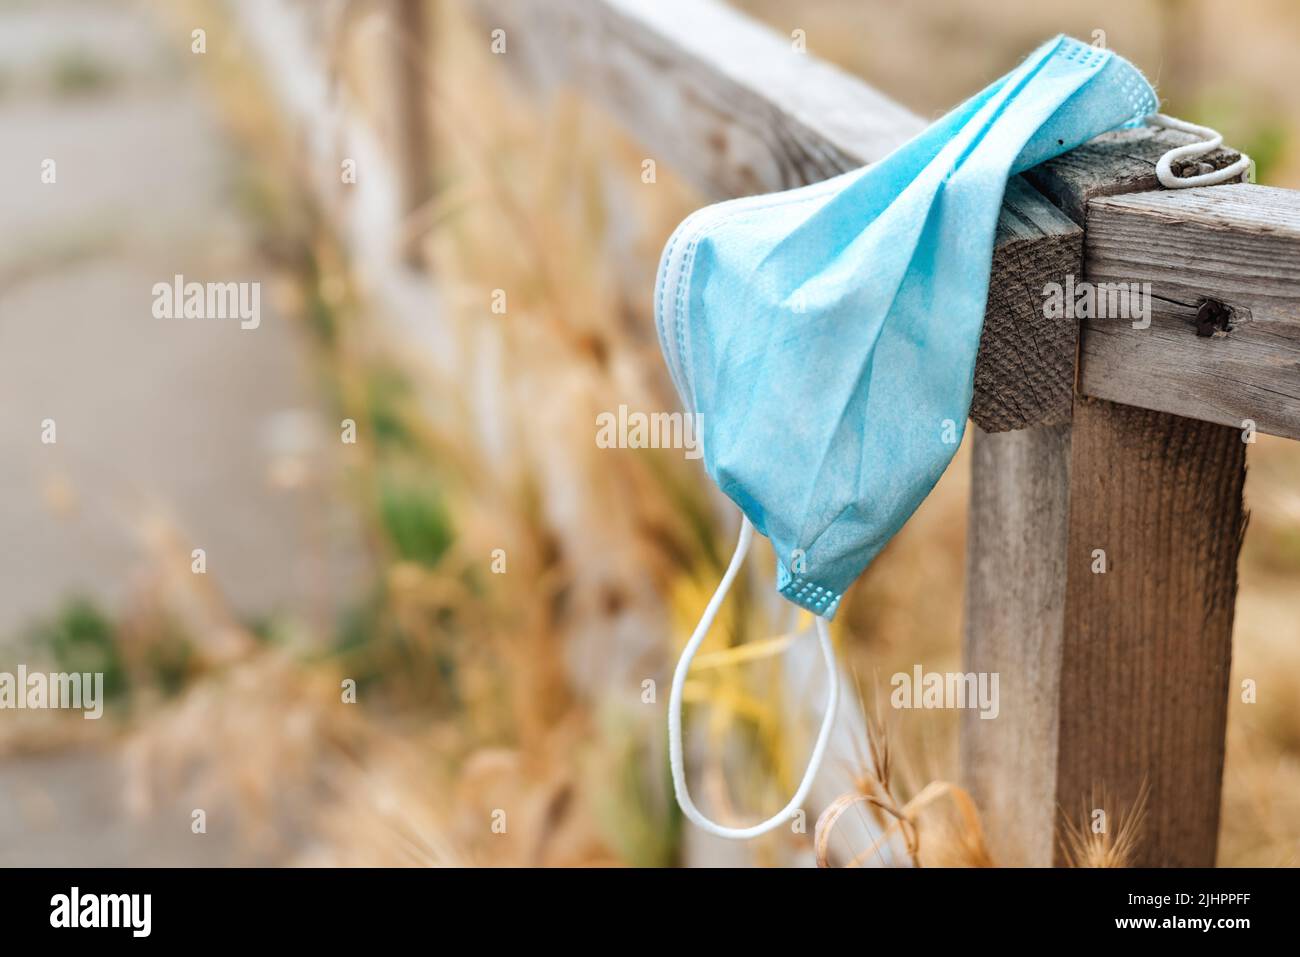 Waste during COVID-19. A blue medical face mask hangs on a wooden fence and is thrown into the nature among the yellow grass. End of quarantine. Environmental pollution with plastic. Stock Photo